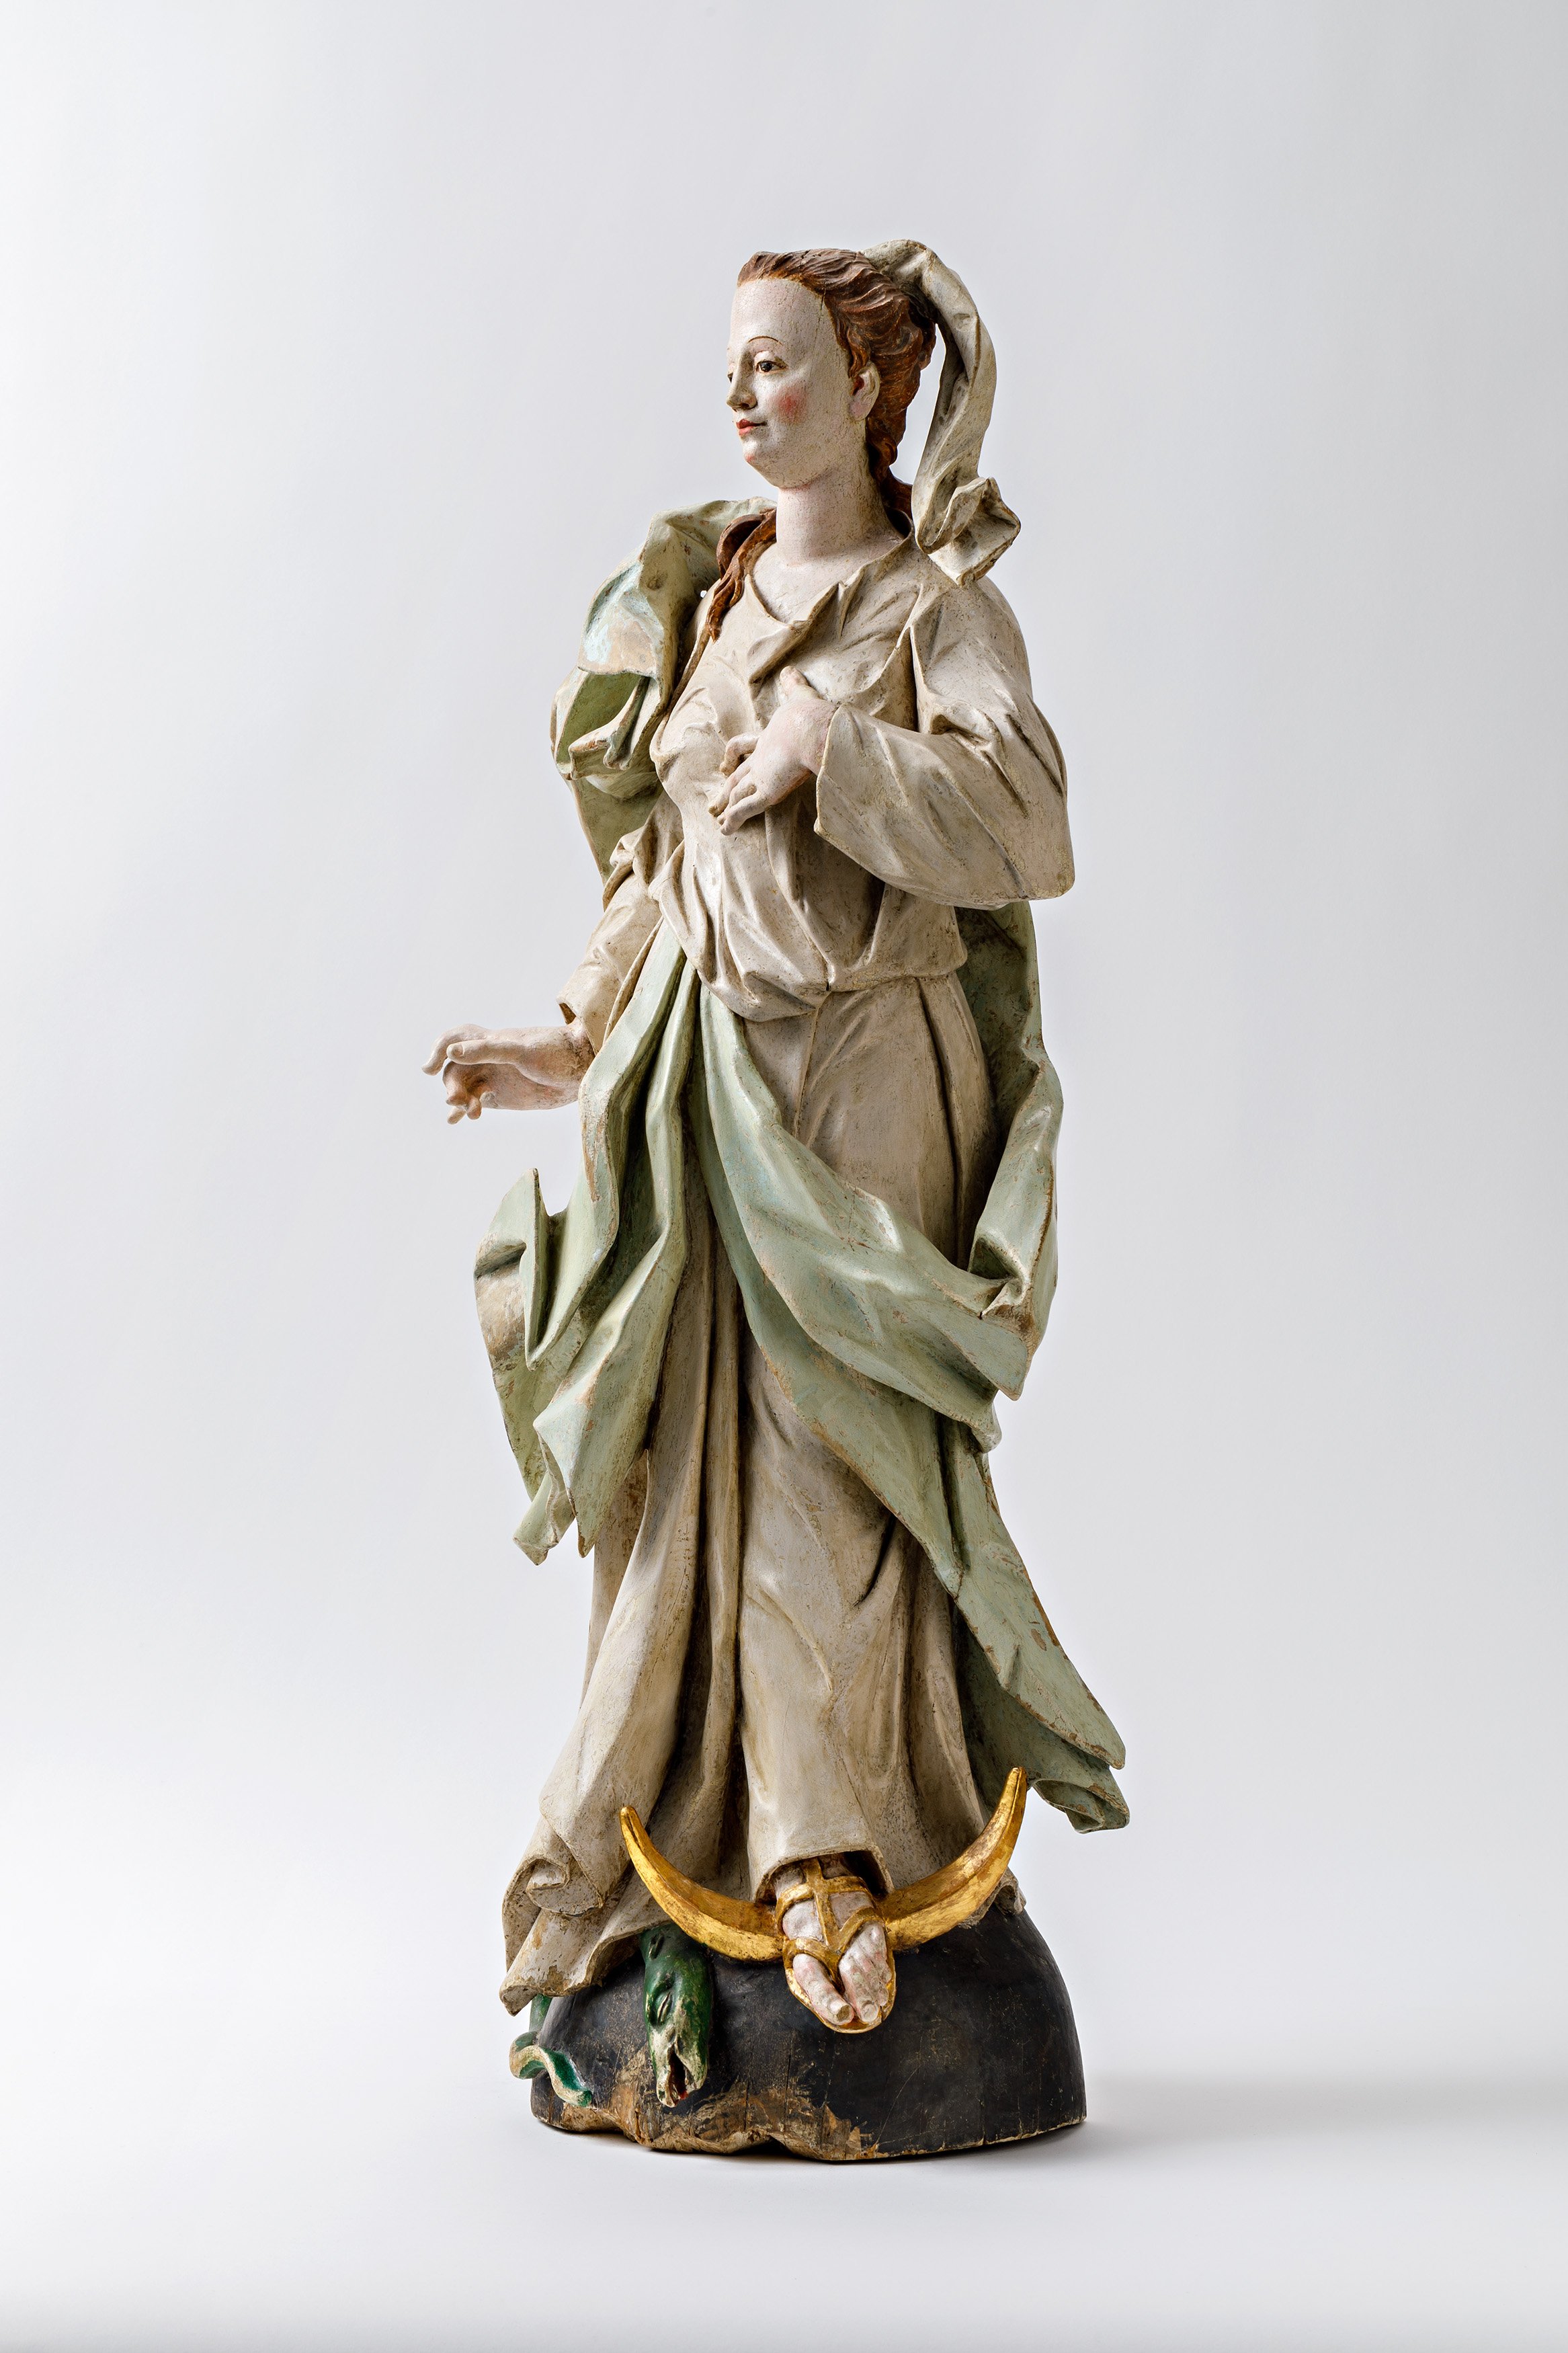 Maria Immaculata (Zeppelin Museum CC BY-ND)